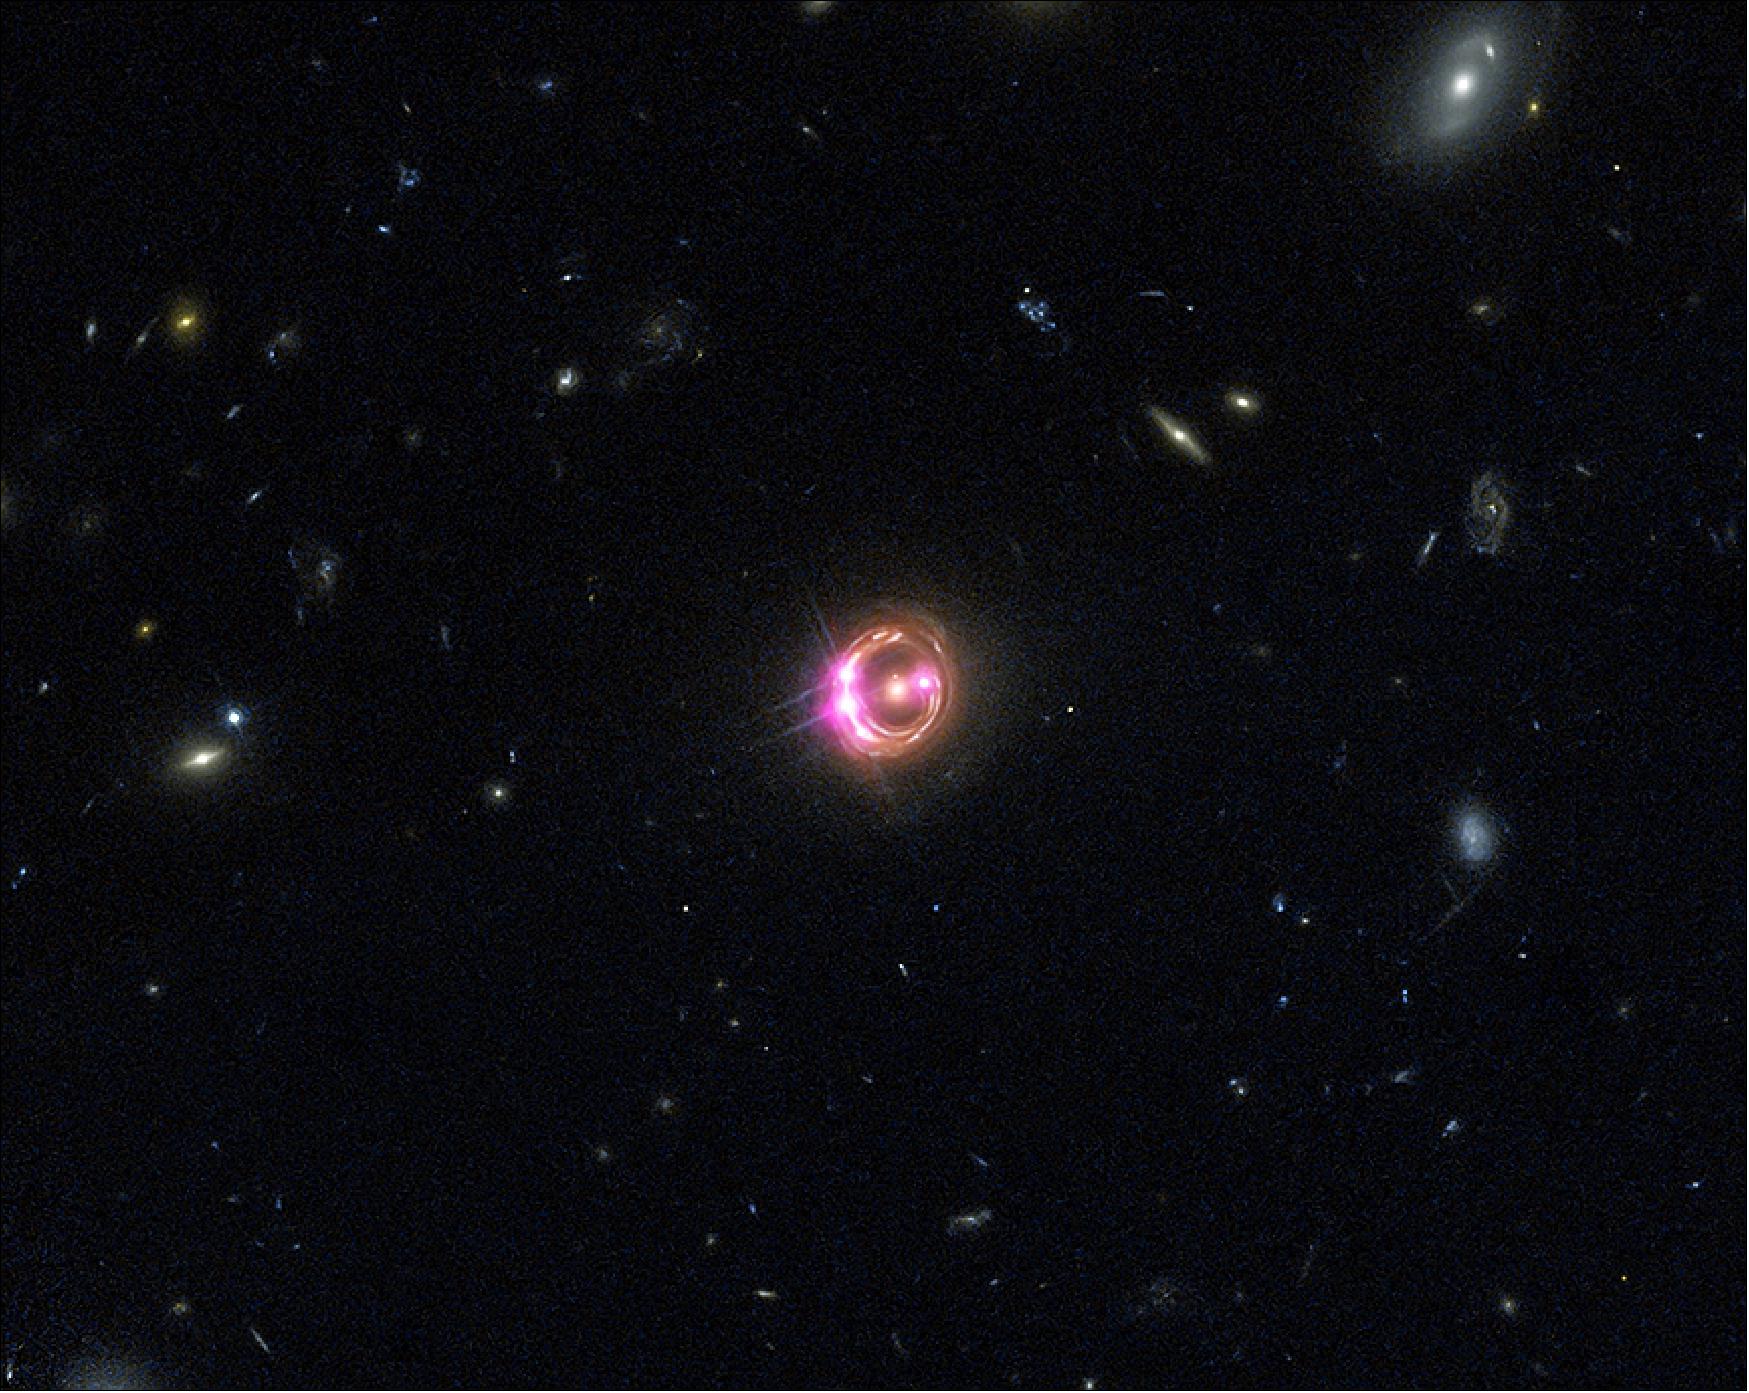 Figure 52: Multiple images of a distant quasar are visible in this combined view from NASA's Chandra X-ray Observatory and the Hubble Space Telescope. The Chandra data, along with data from ESA's XMM-Newton, were used to directly measure the spin of the supermassive black hole powering this quasar. This is the most distant black hole where such a measurement has been made, as reported in our press release (image credit: X-ray: NASA/CXC/Univ of Michigan/R. C. Reis et al; Optical: NASA/STScI)